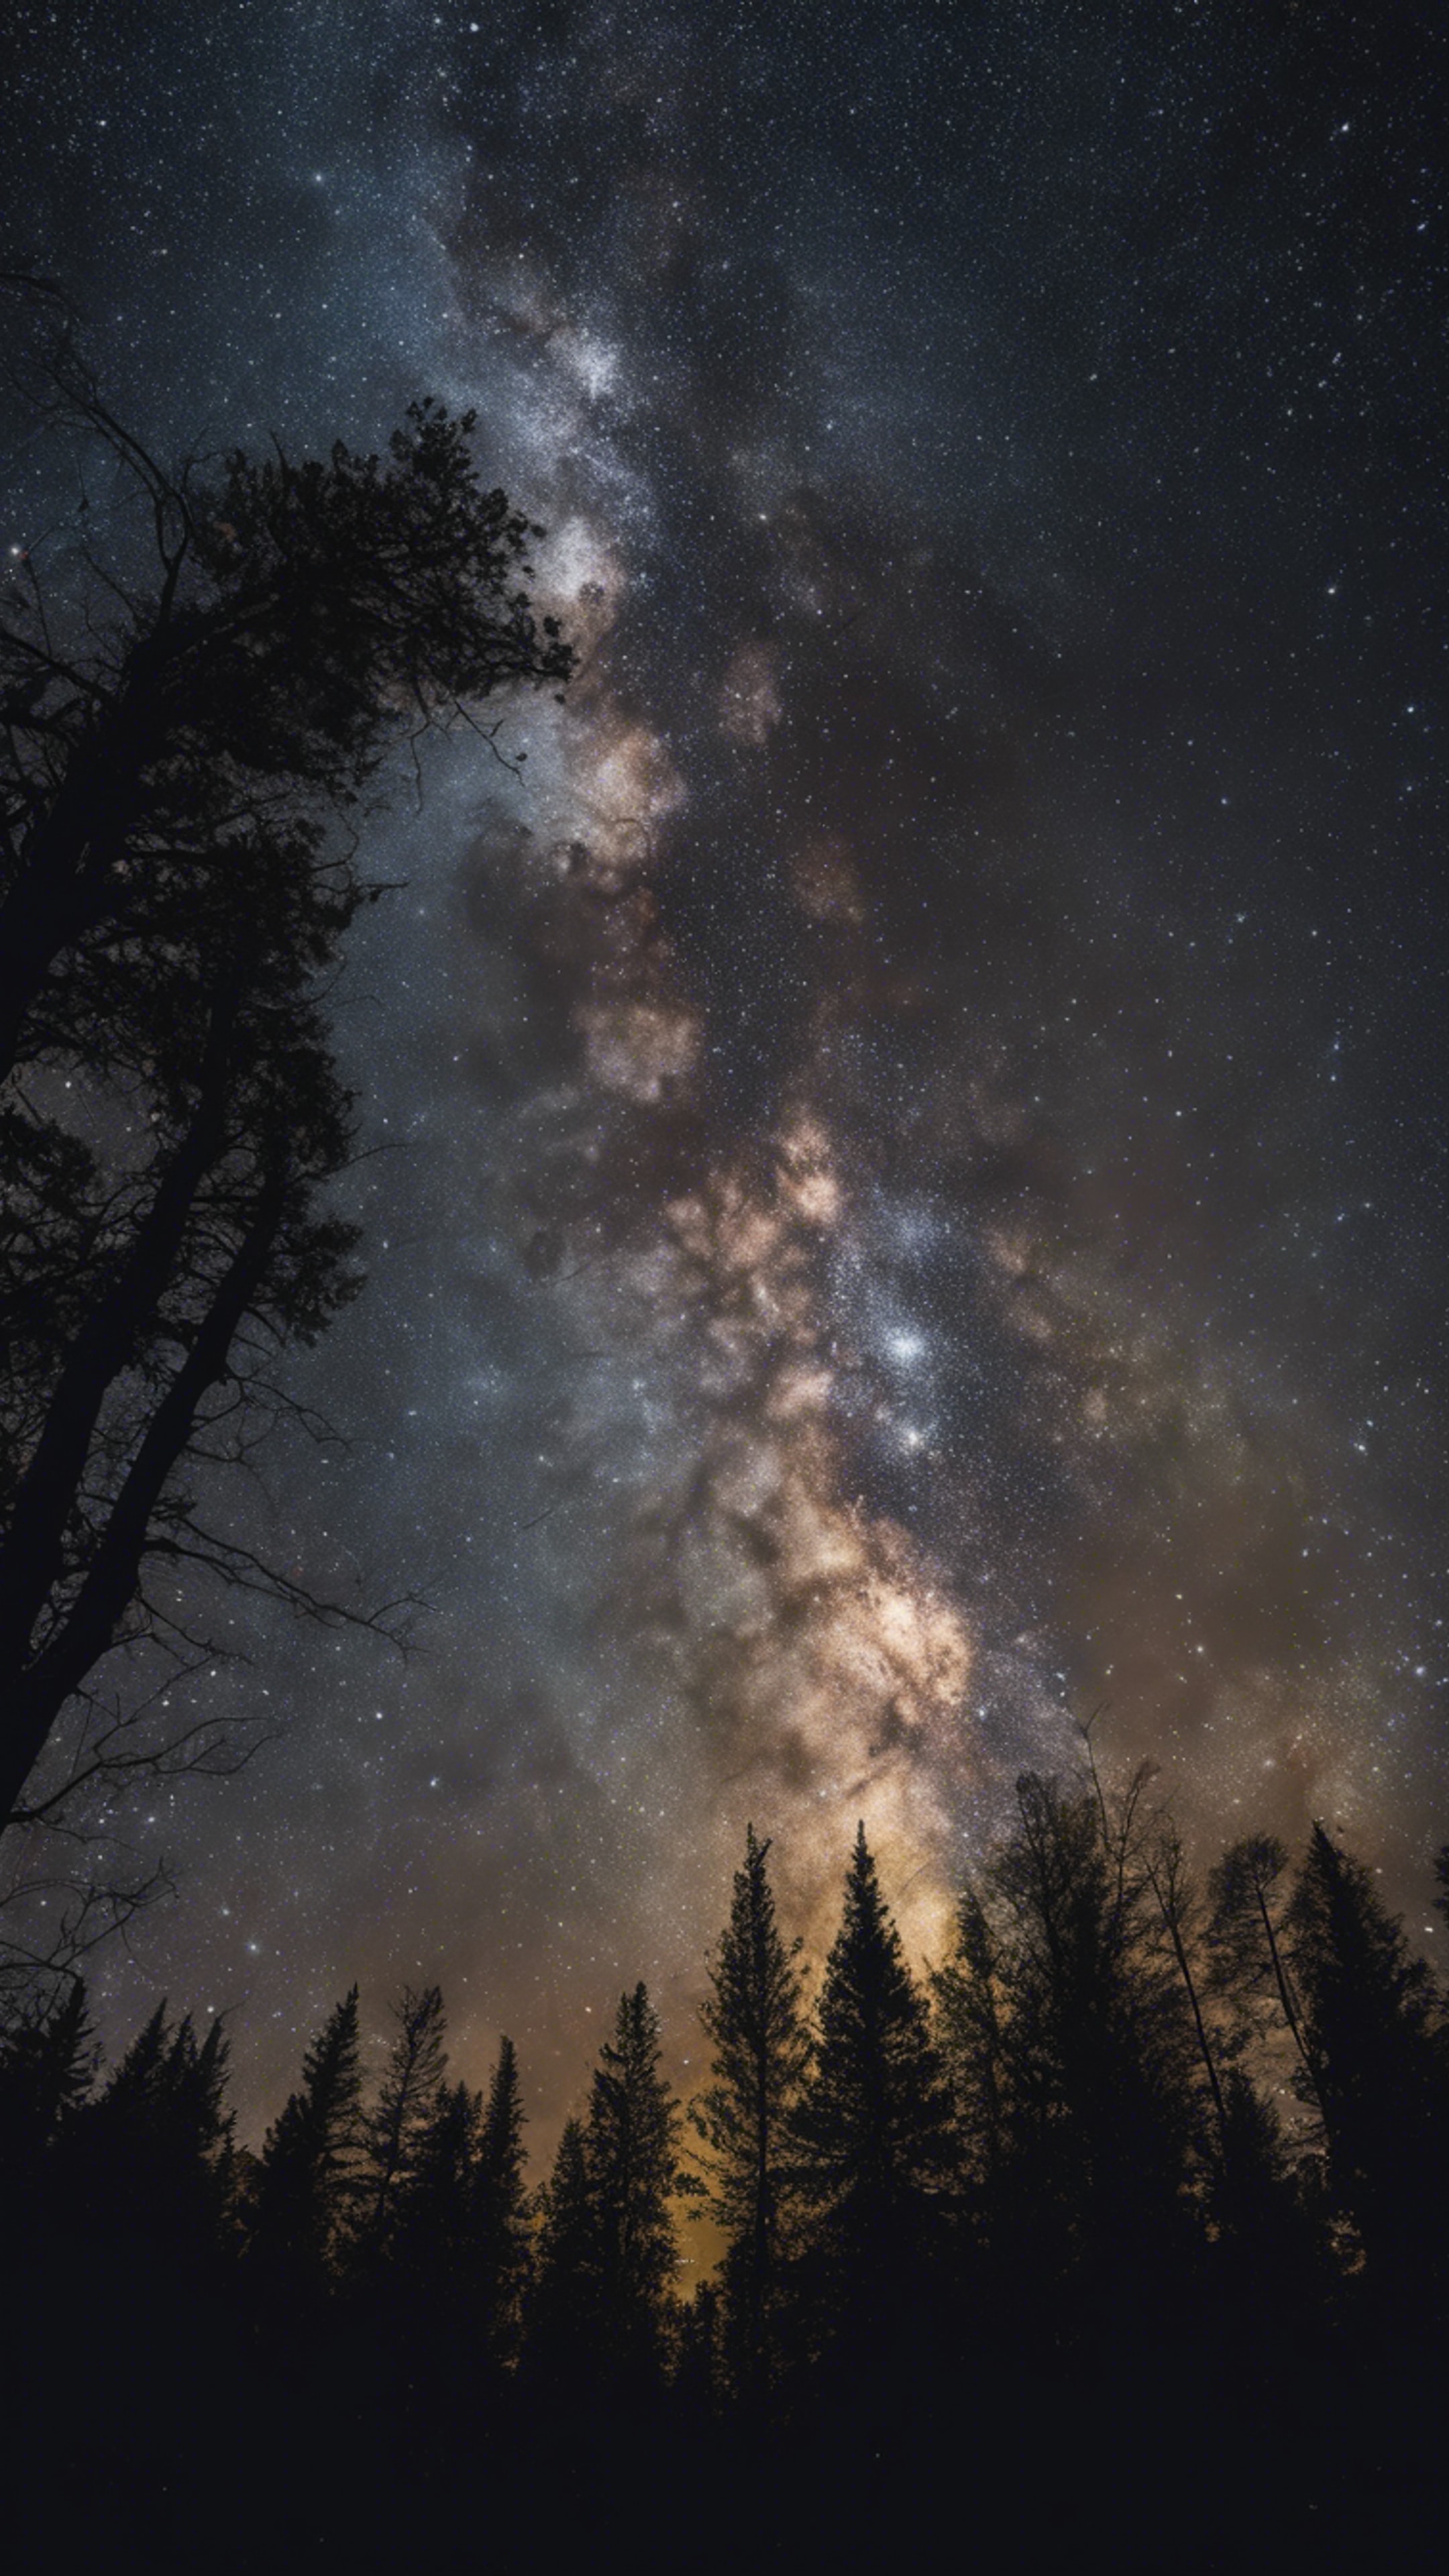 An astrophotograph showcasing the radiant Milky Way, against the contrast of a dark forest silhouette. Sfondo[89bcc876a6704e52b700]